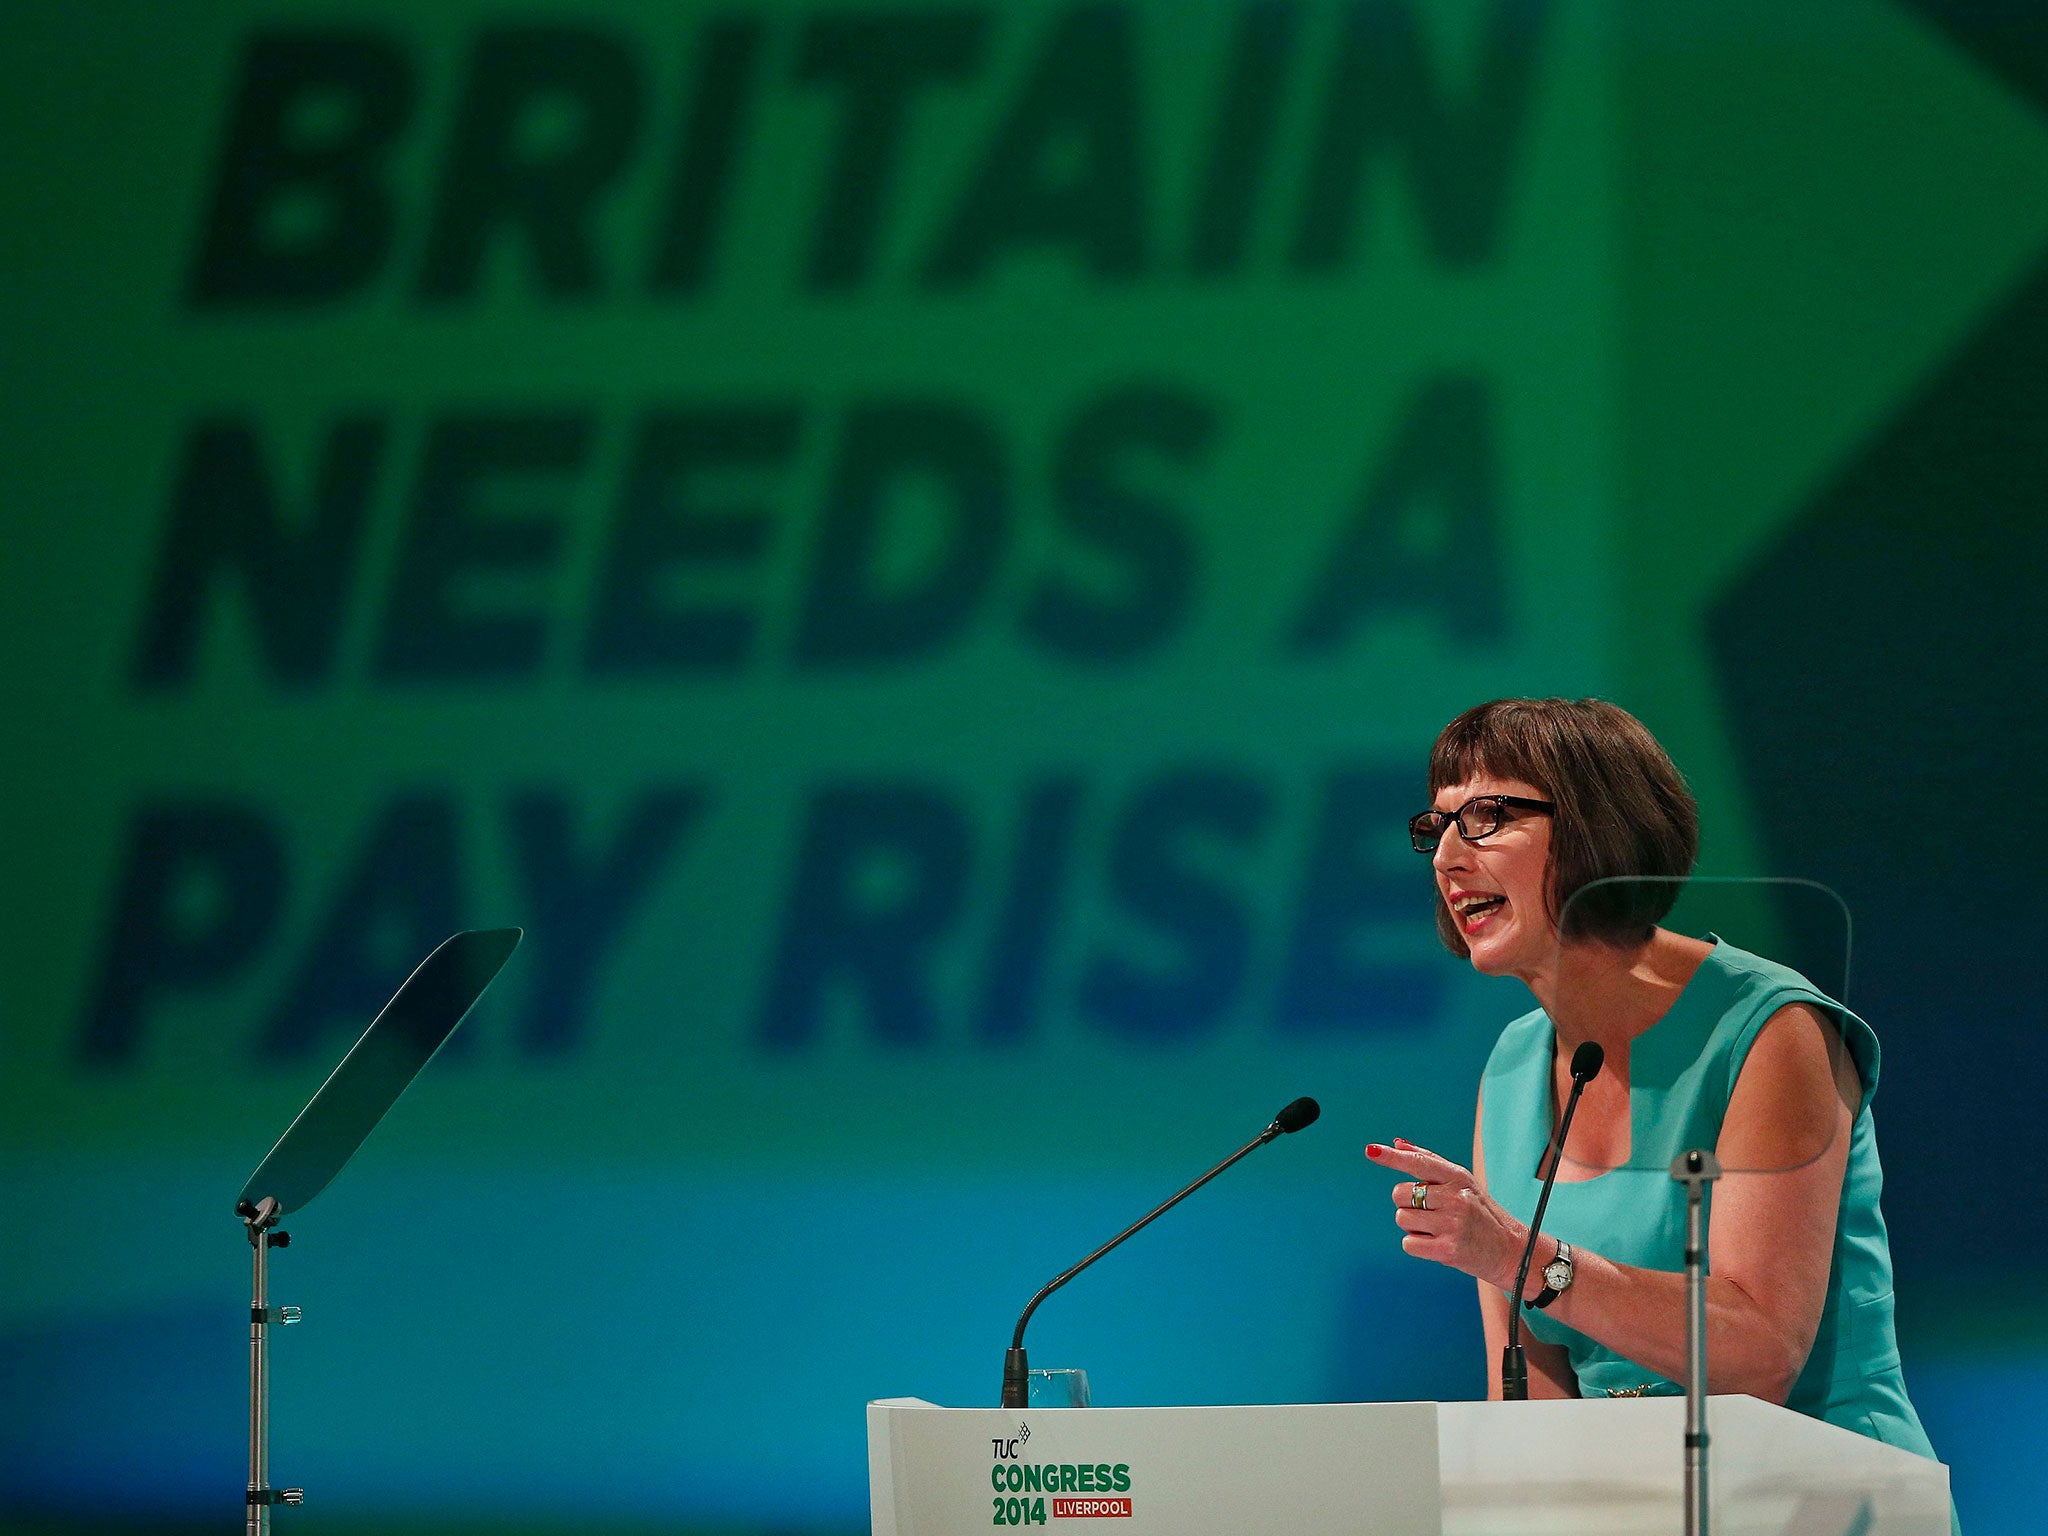 The TUC General Secretary, Frances O’Grady, addresses union delegates at their annual conference in Liverpool